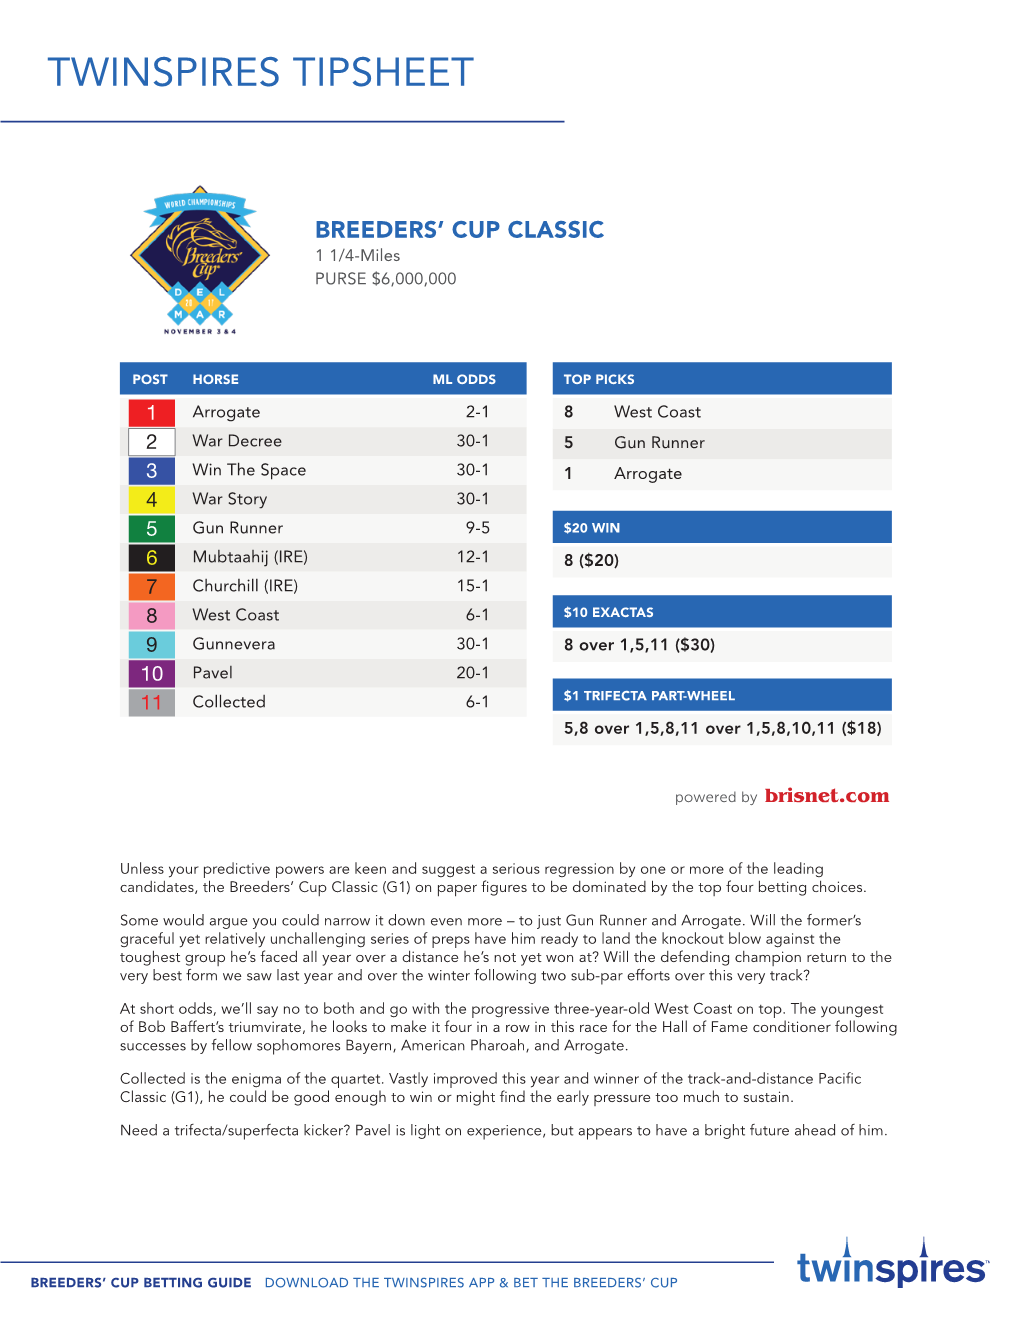 The Breeders' Cup Classic Tip Sheet Page Here